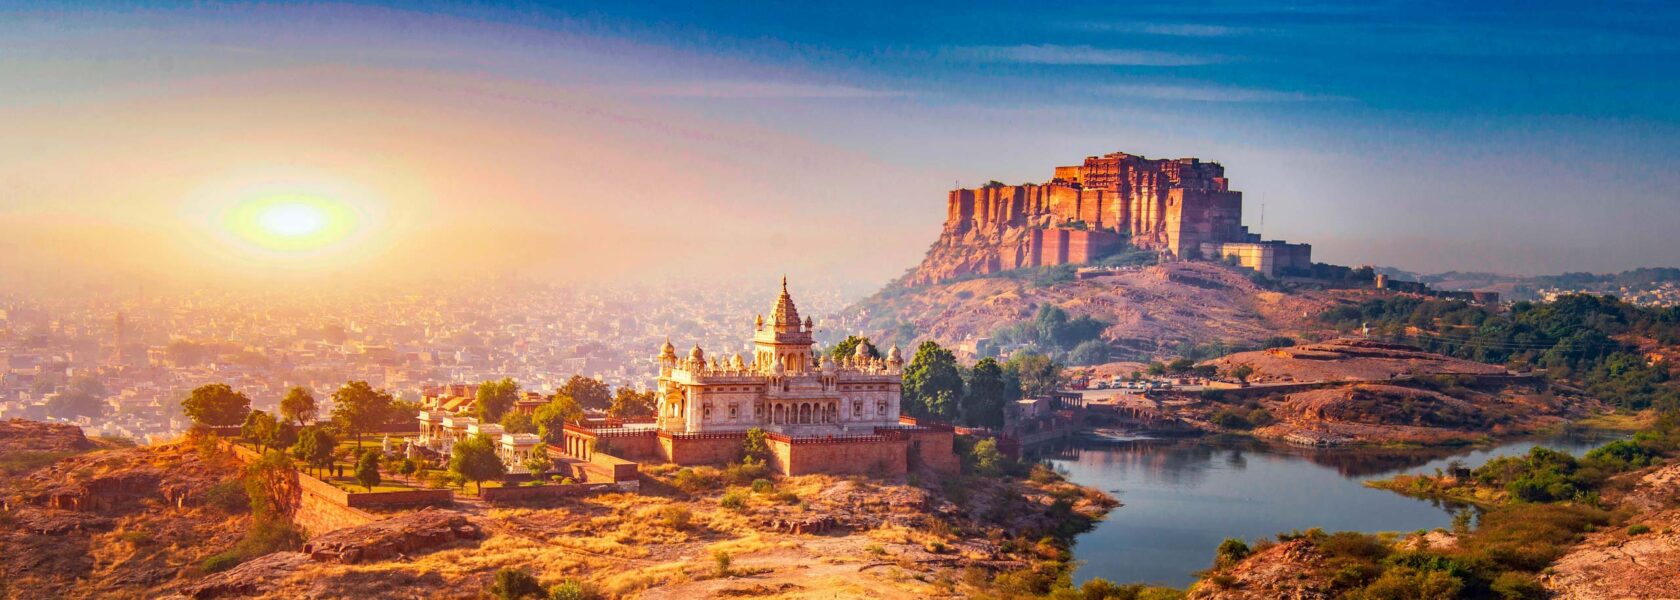 Sunrise at the Mehrangarh Fort and Jaswant Thada Mausoleum with the city in the background.